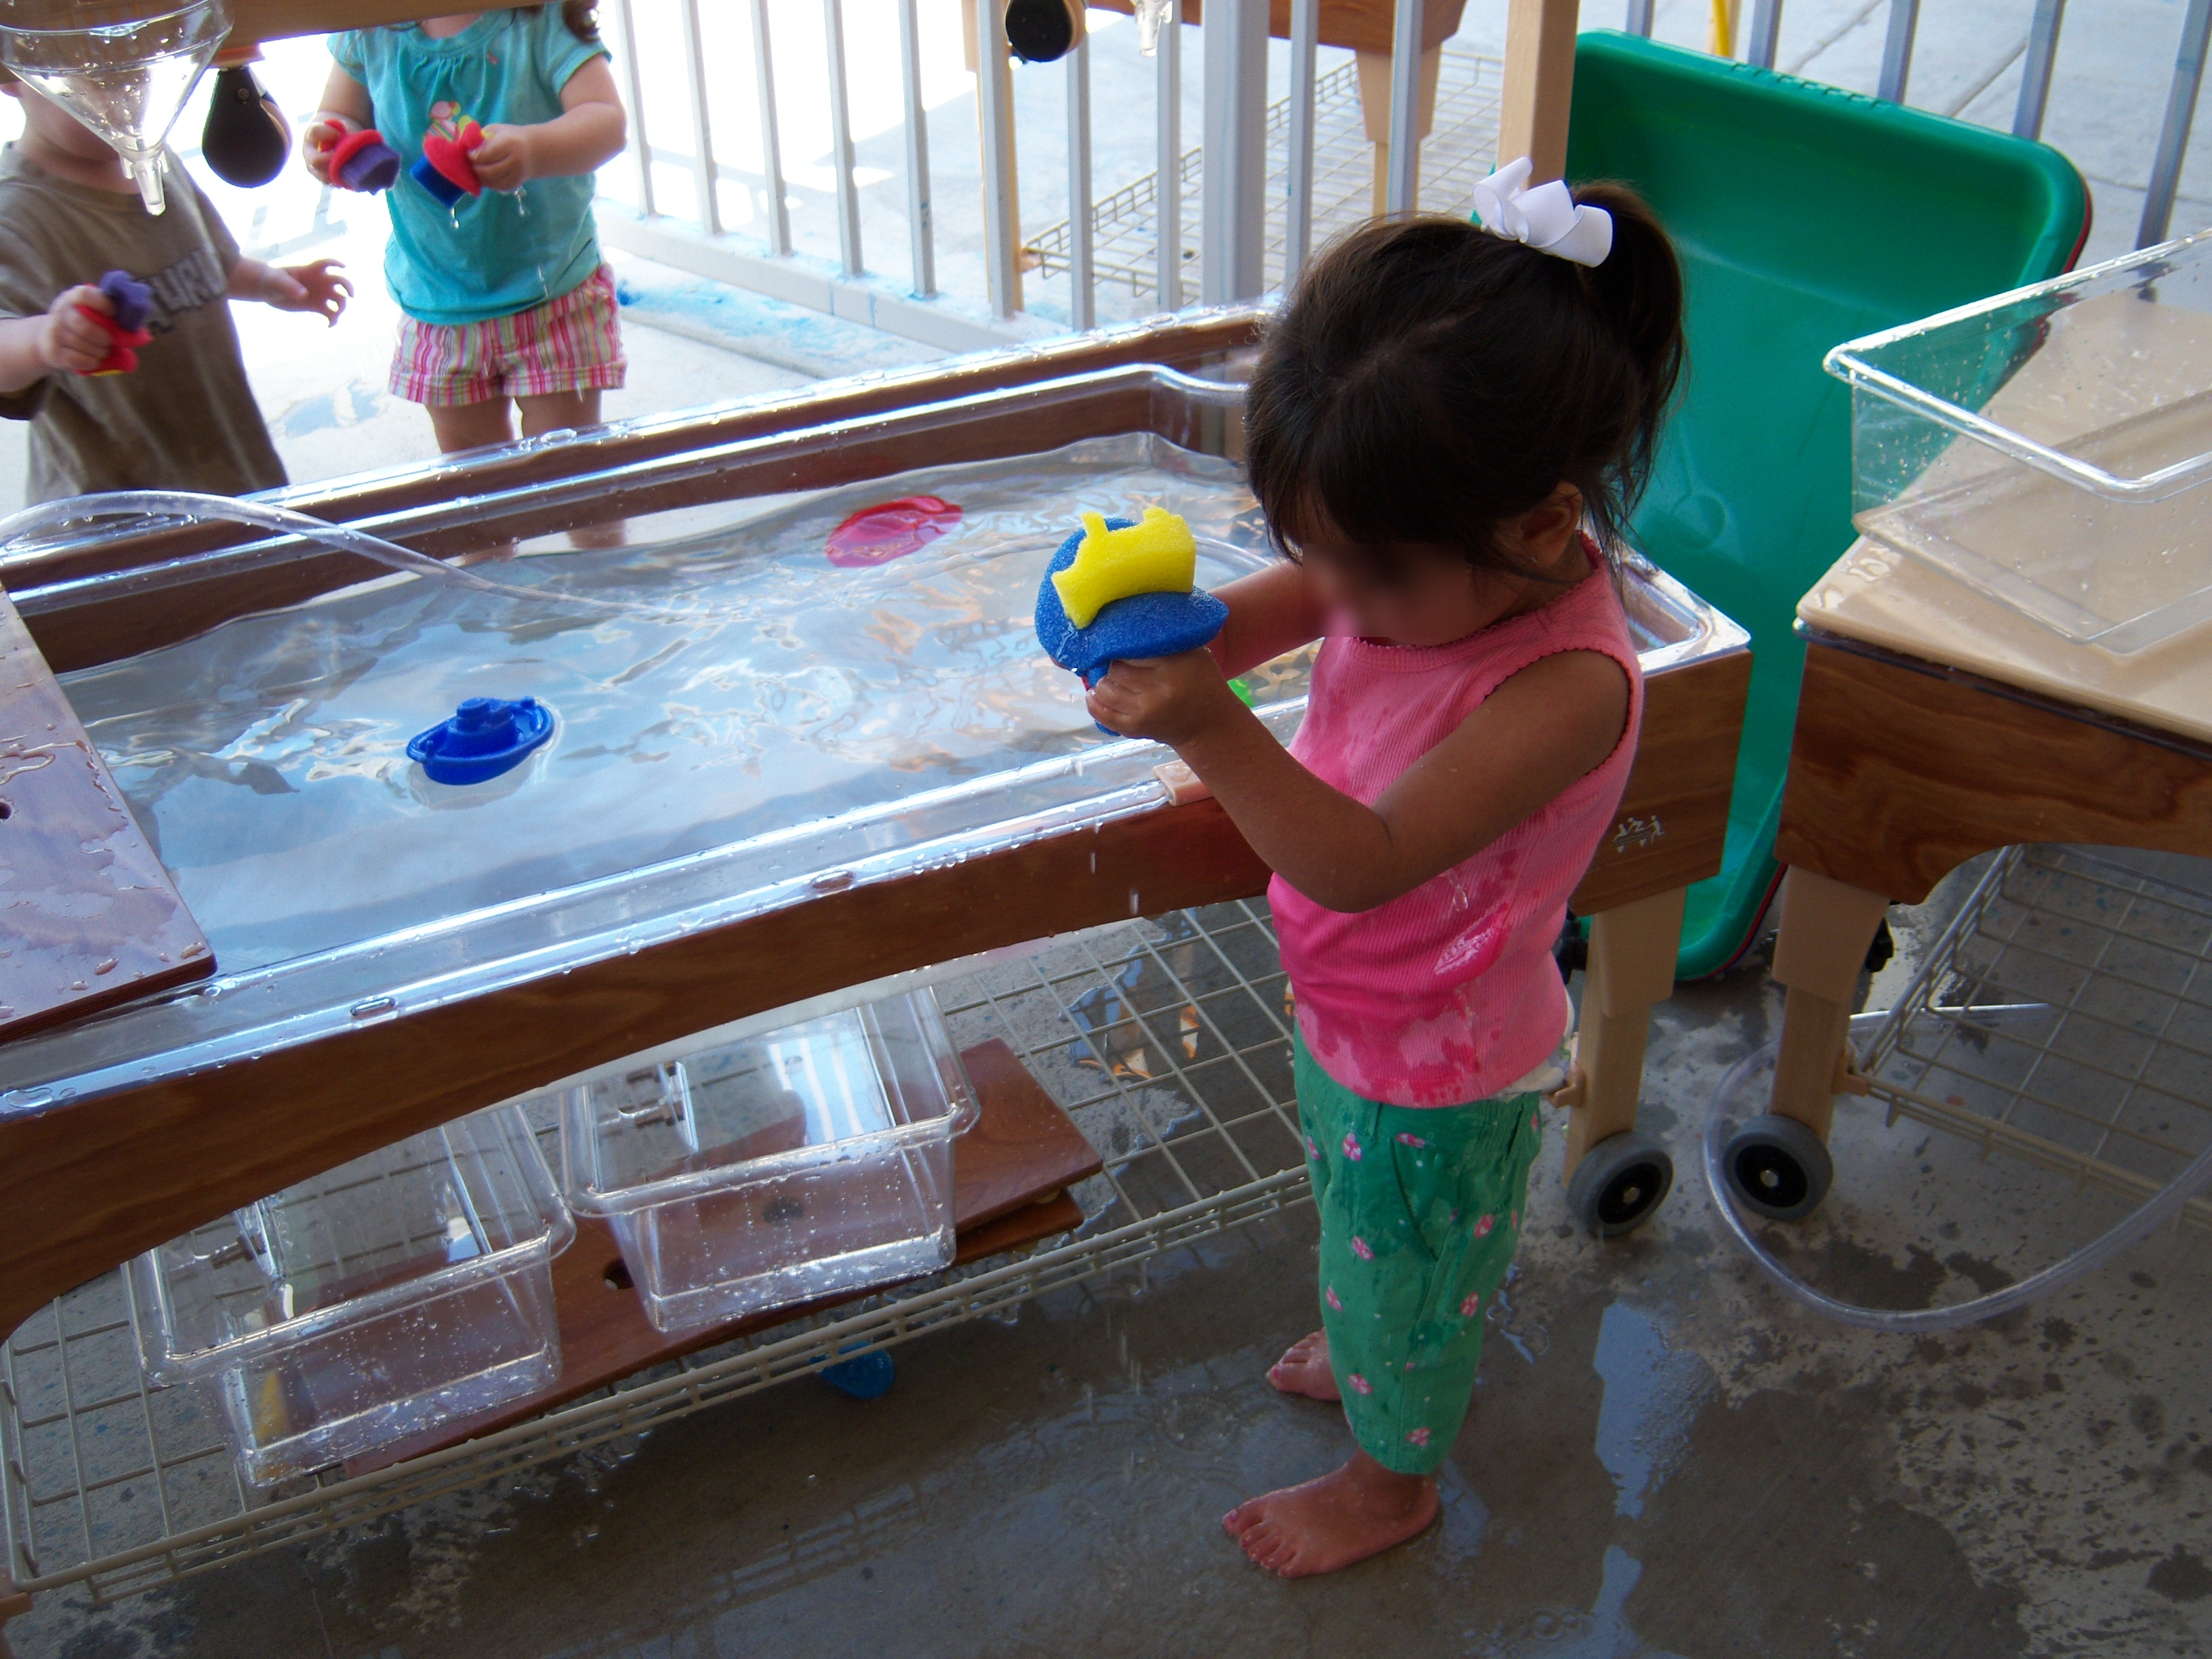 Toddlers at water table.